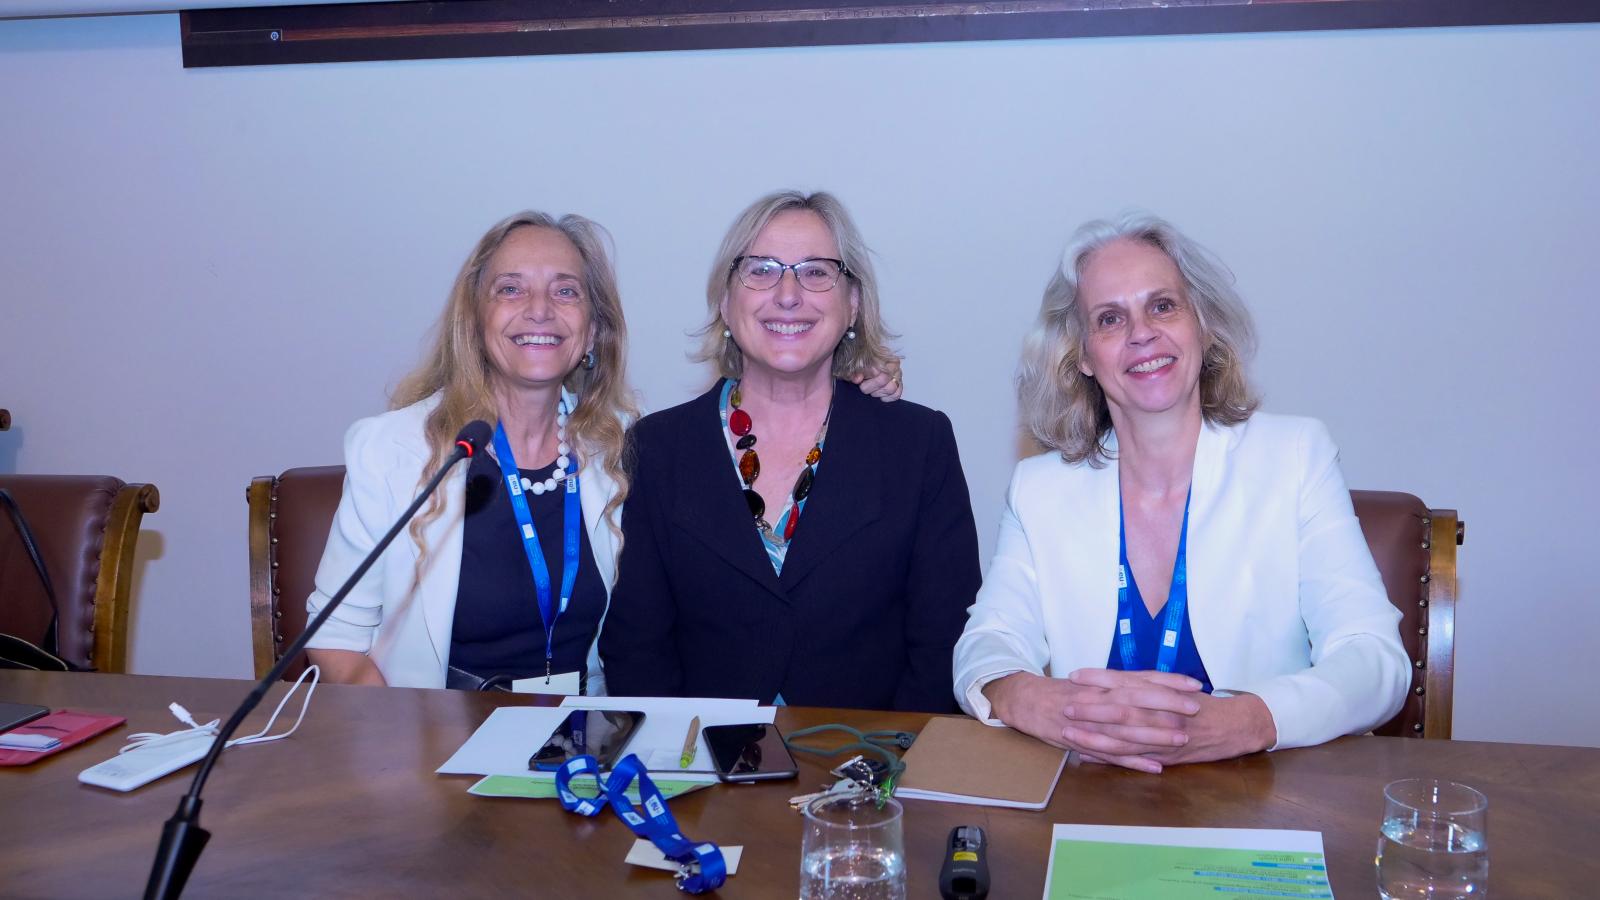 Vice-rector for Research Maria Pia Abbracchio, Vice-rector for Internationalization and member of the 4EU+ Management Committee Antonella Baldi, and the 4EU+ Alliance Secretary General Isabelle Kratz. 